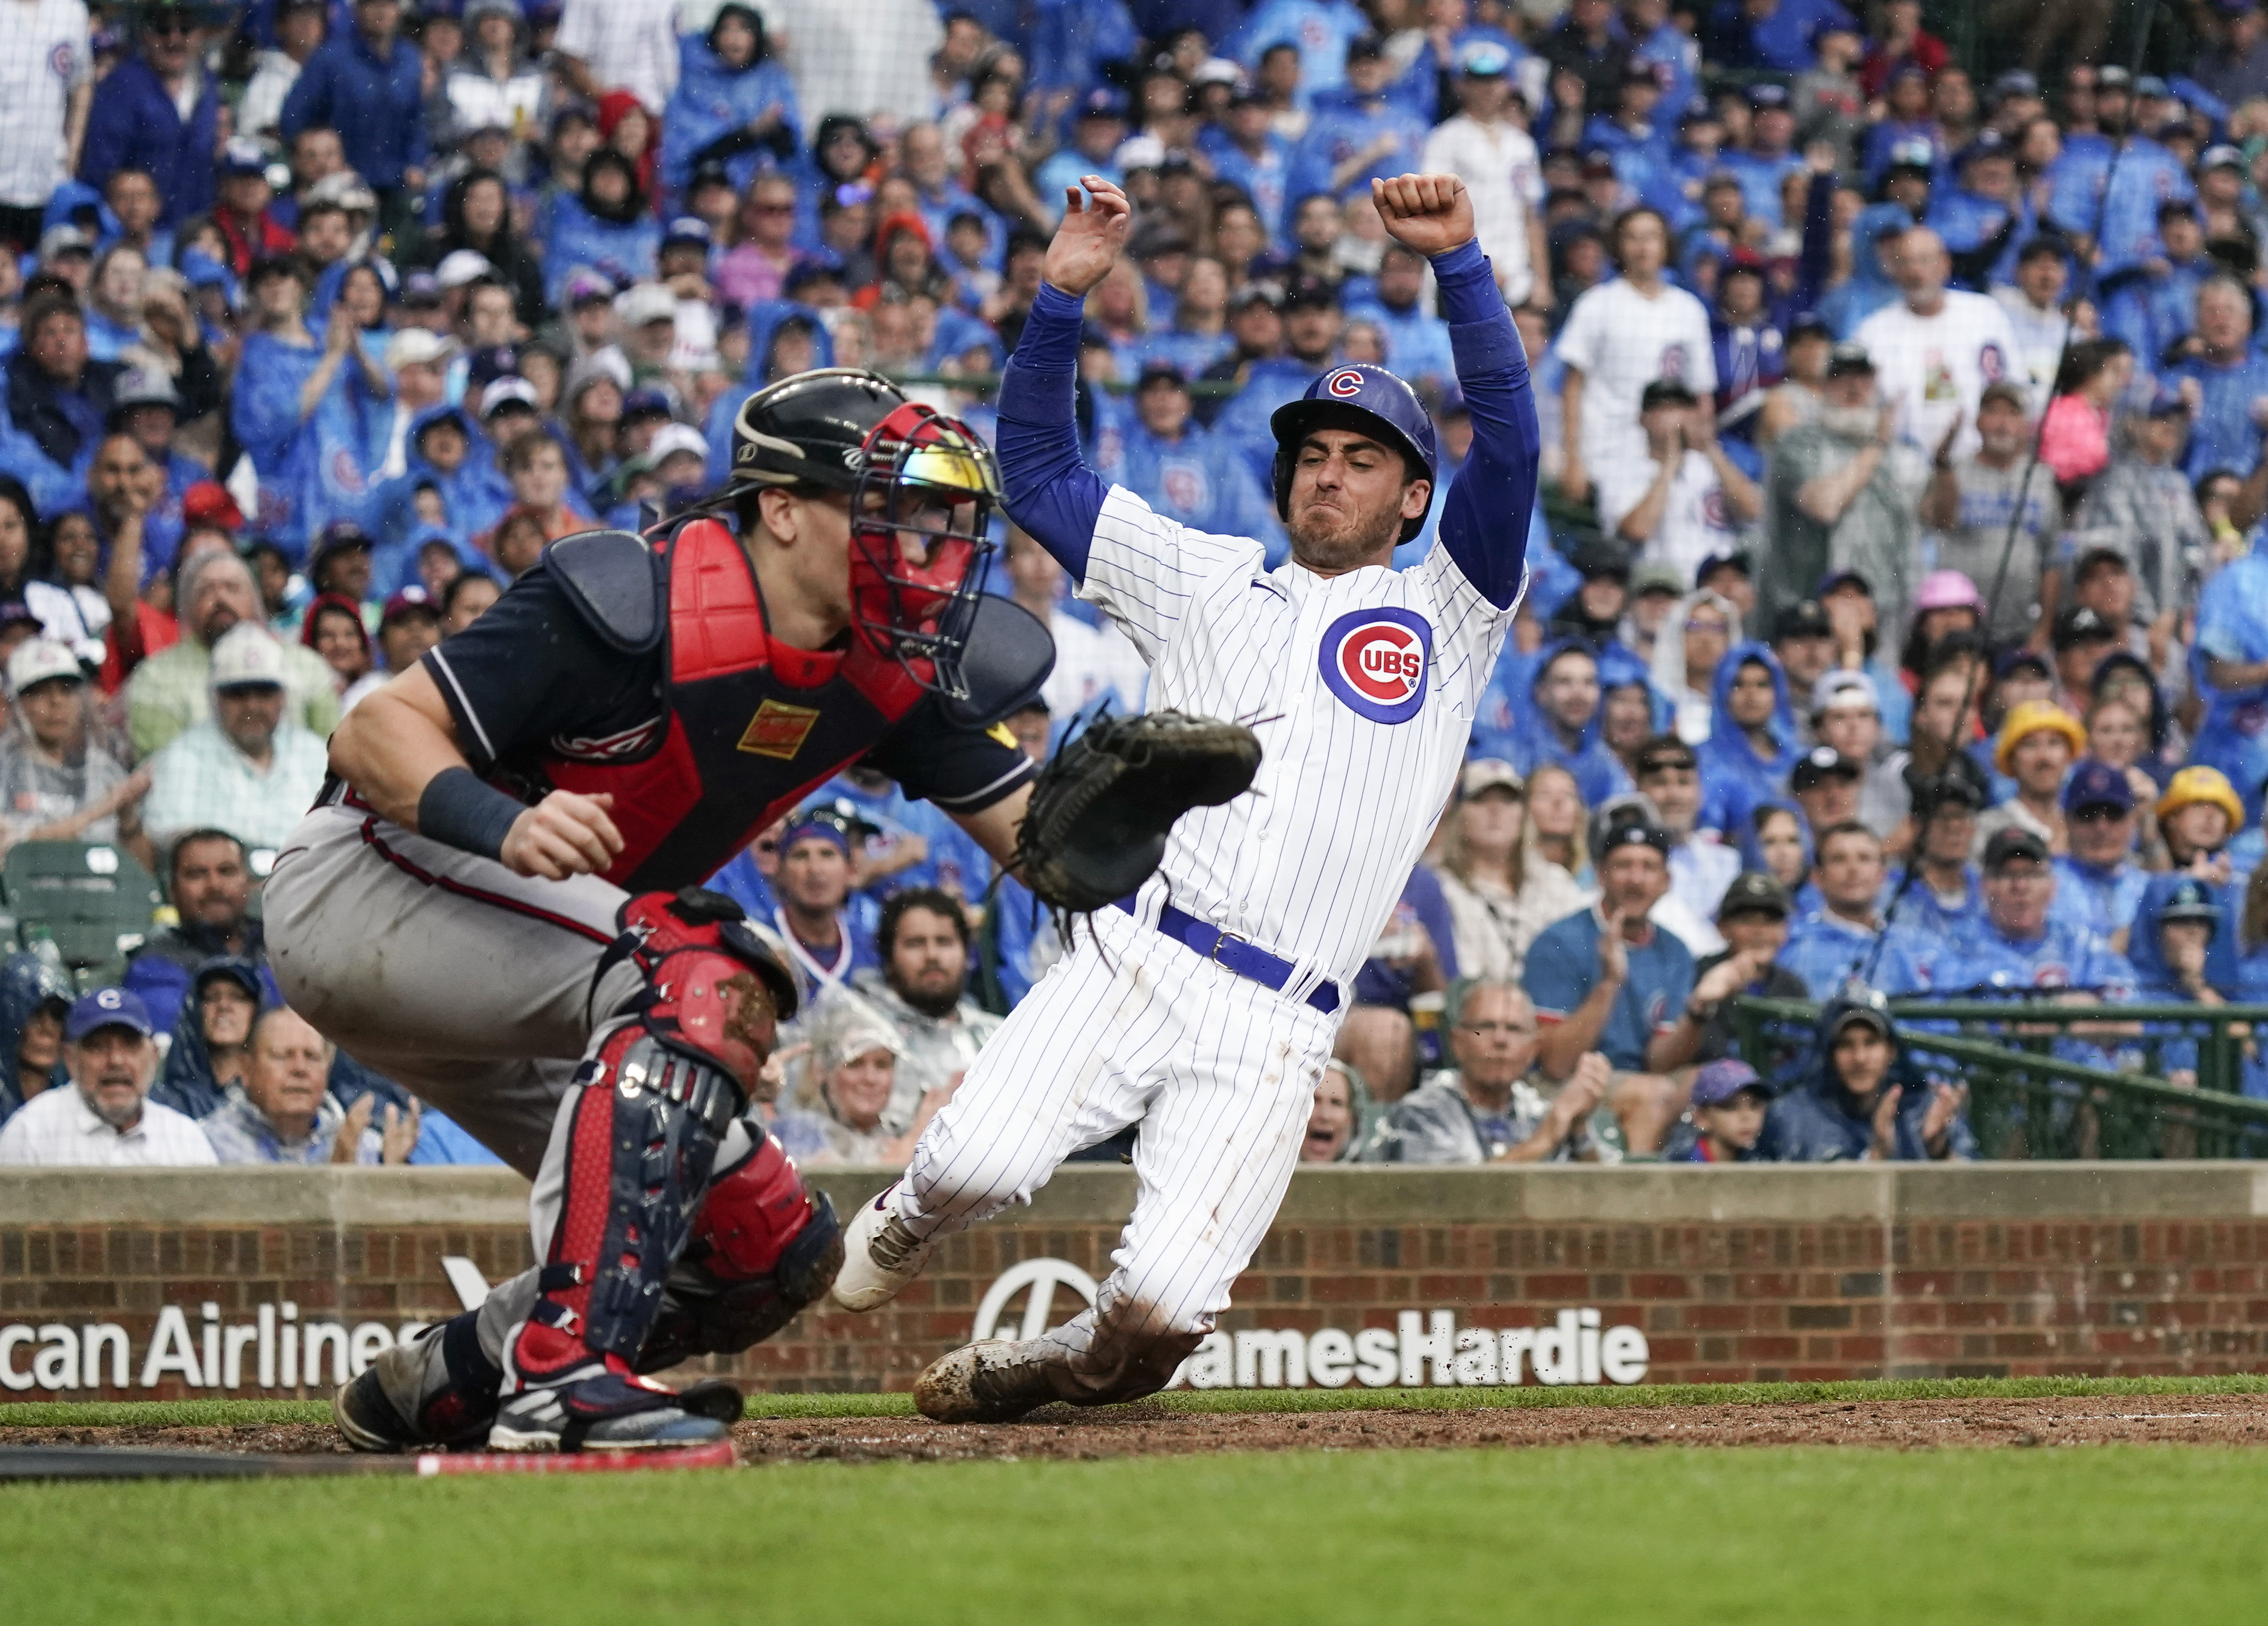 Cody Bellinger goes yard but Chicago Cubs lose third straight to Reds